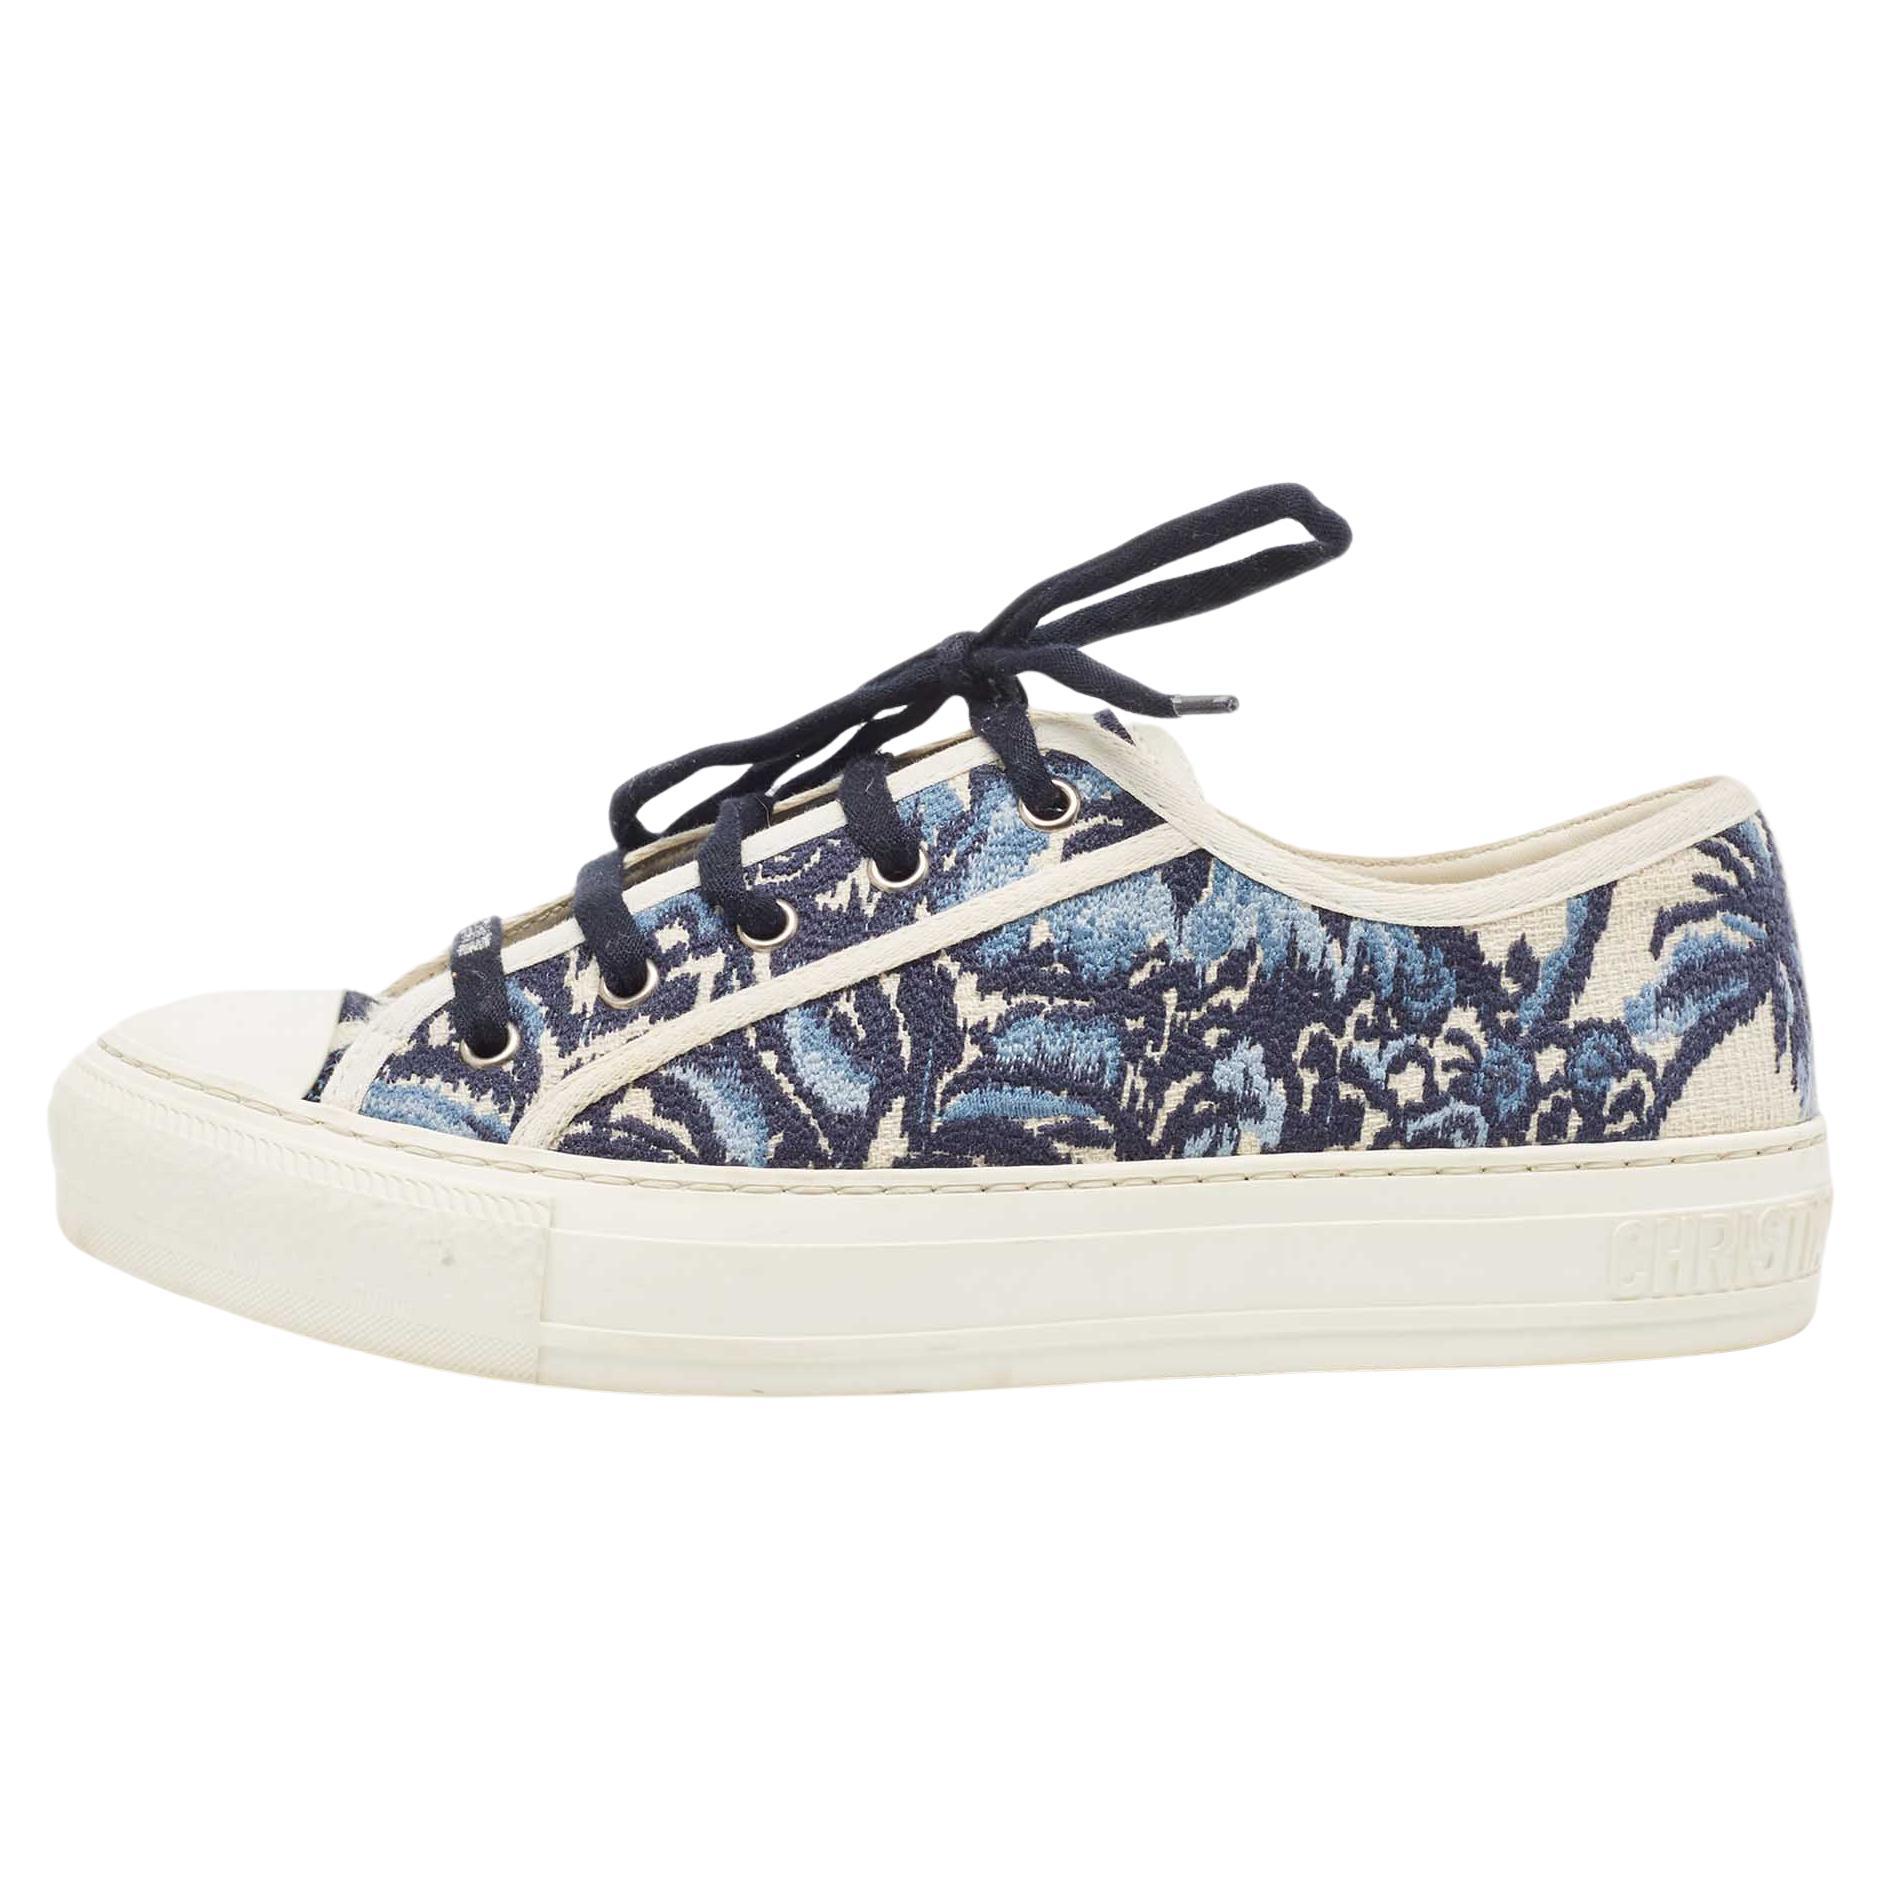 Dior Navy Blue/White Floral Embroidered Canvas Walk'n'Dior Sneakers Size 39